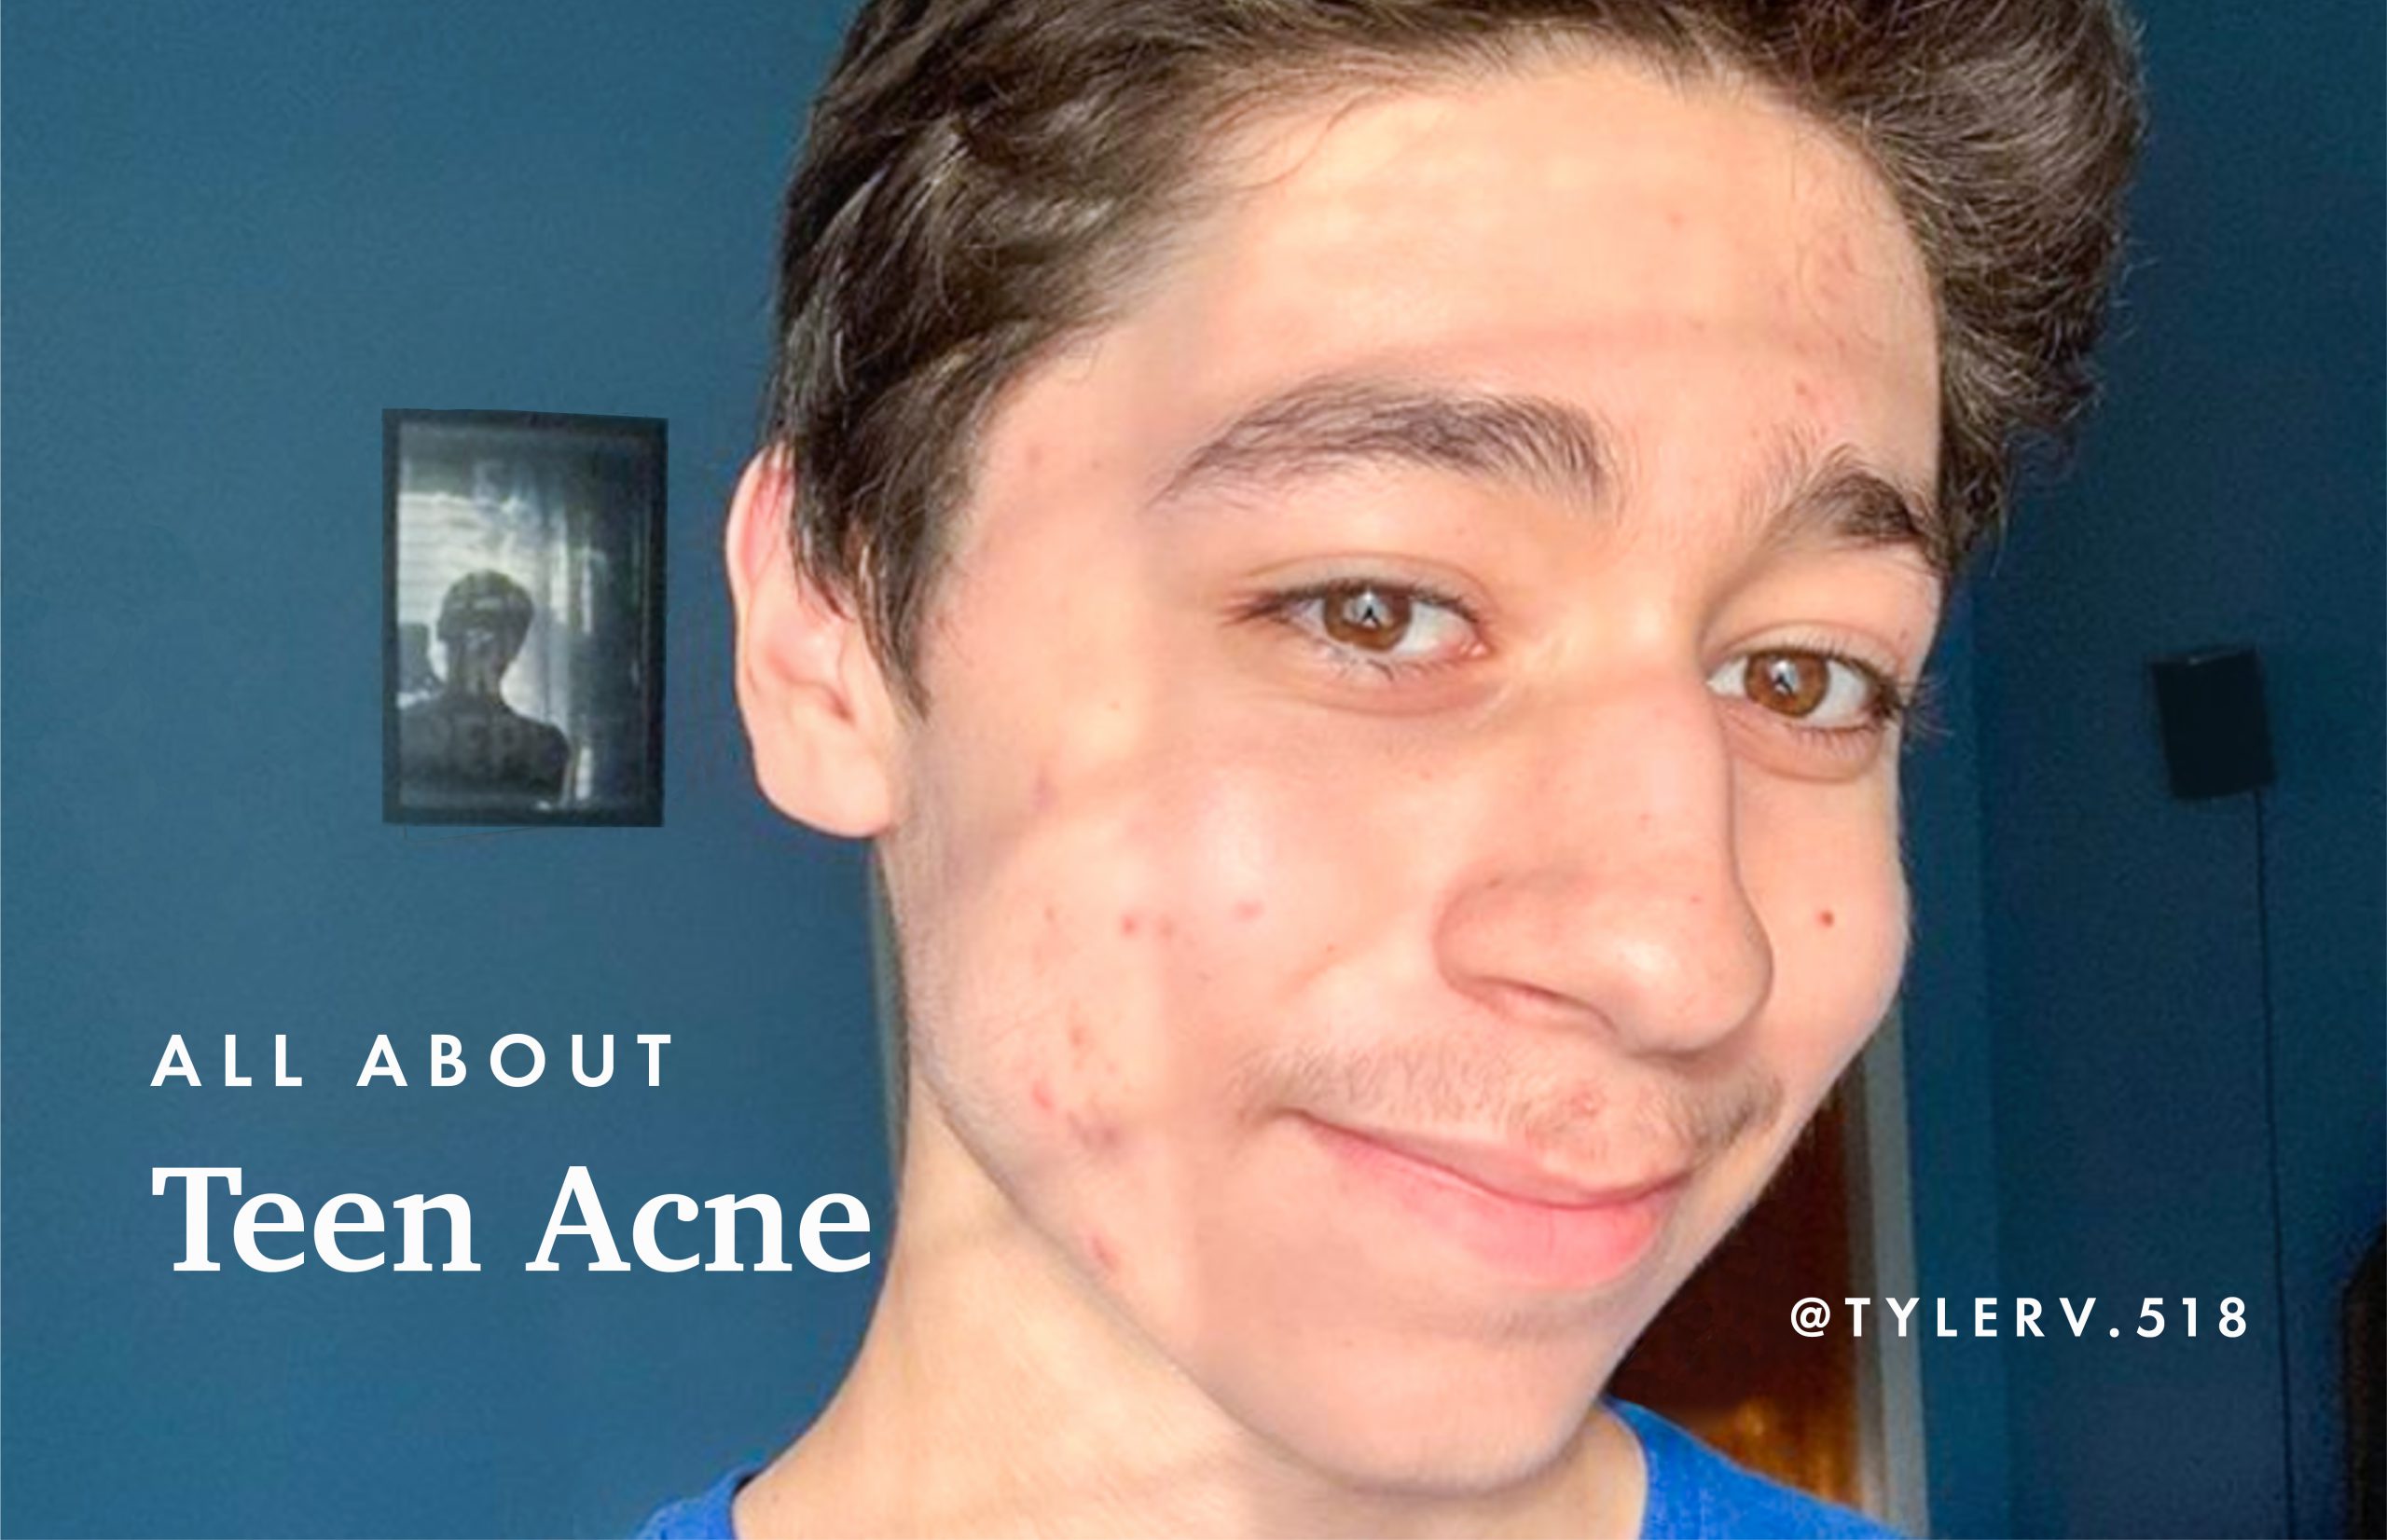 Here's How to Start Managing Teenage Acne at Every Stage